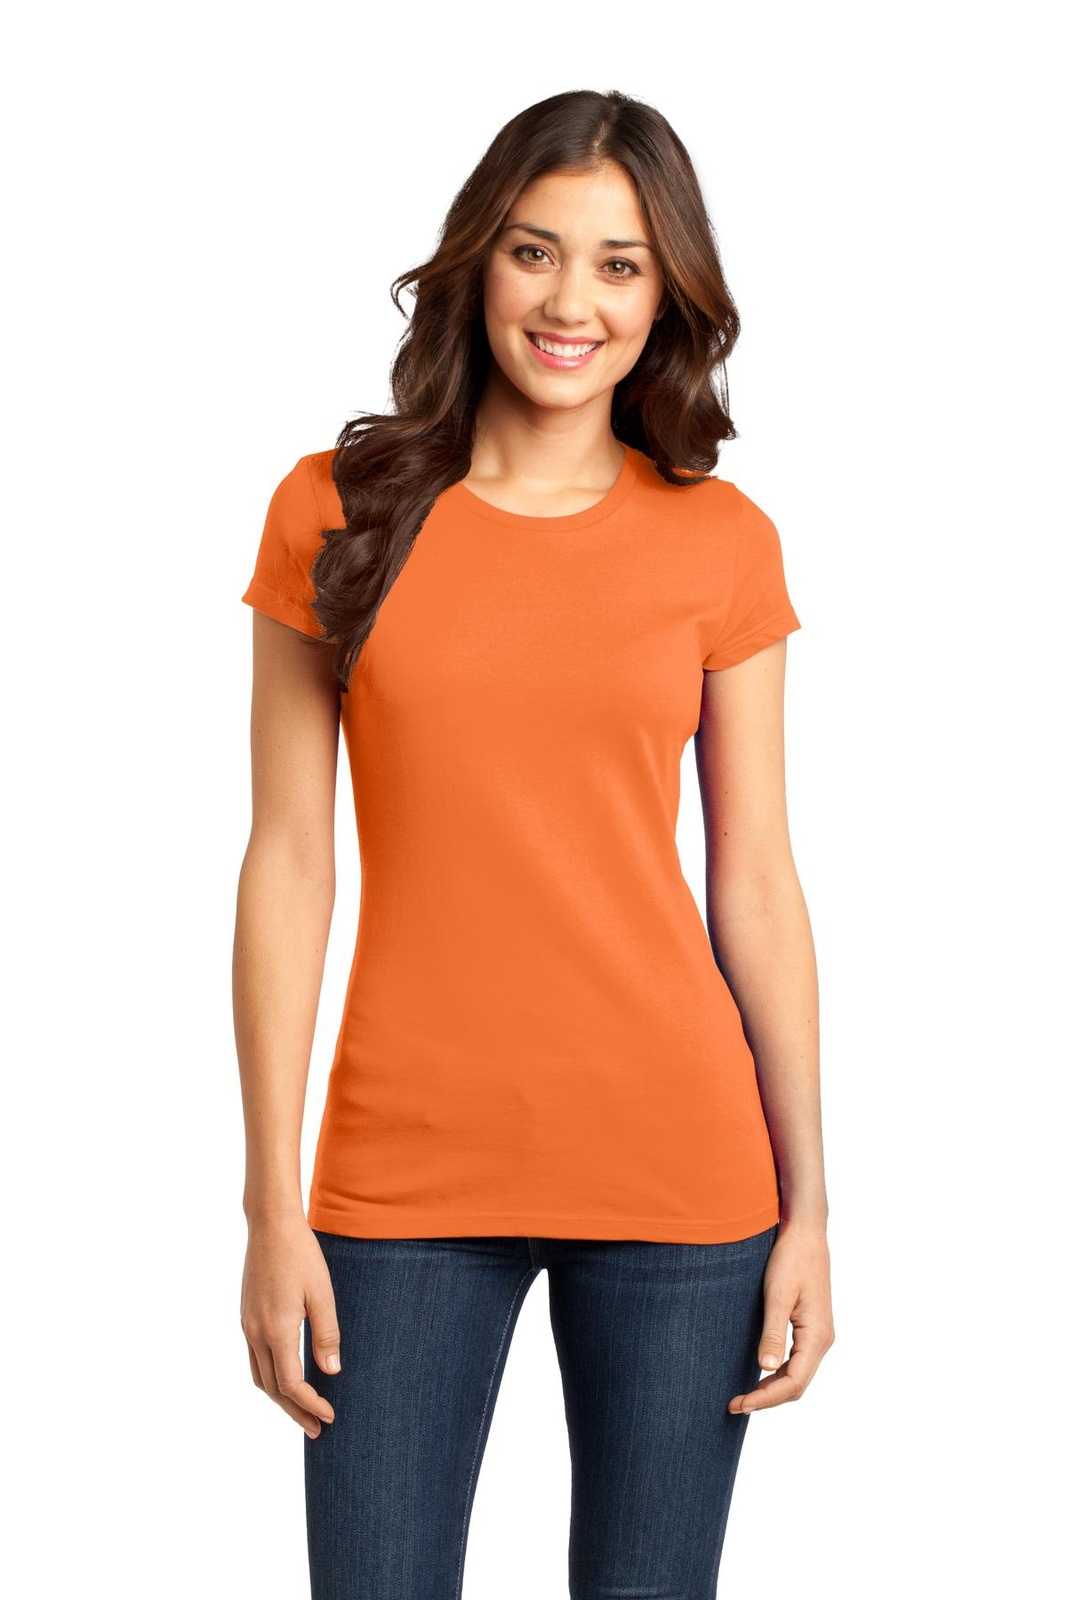 District DT6001 Women's Fitted Very Important Tee - Orange - HIT a Double - 1